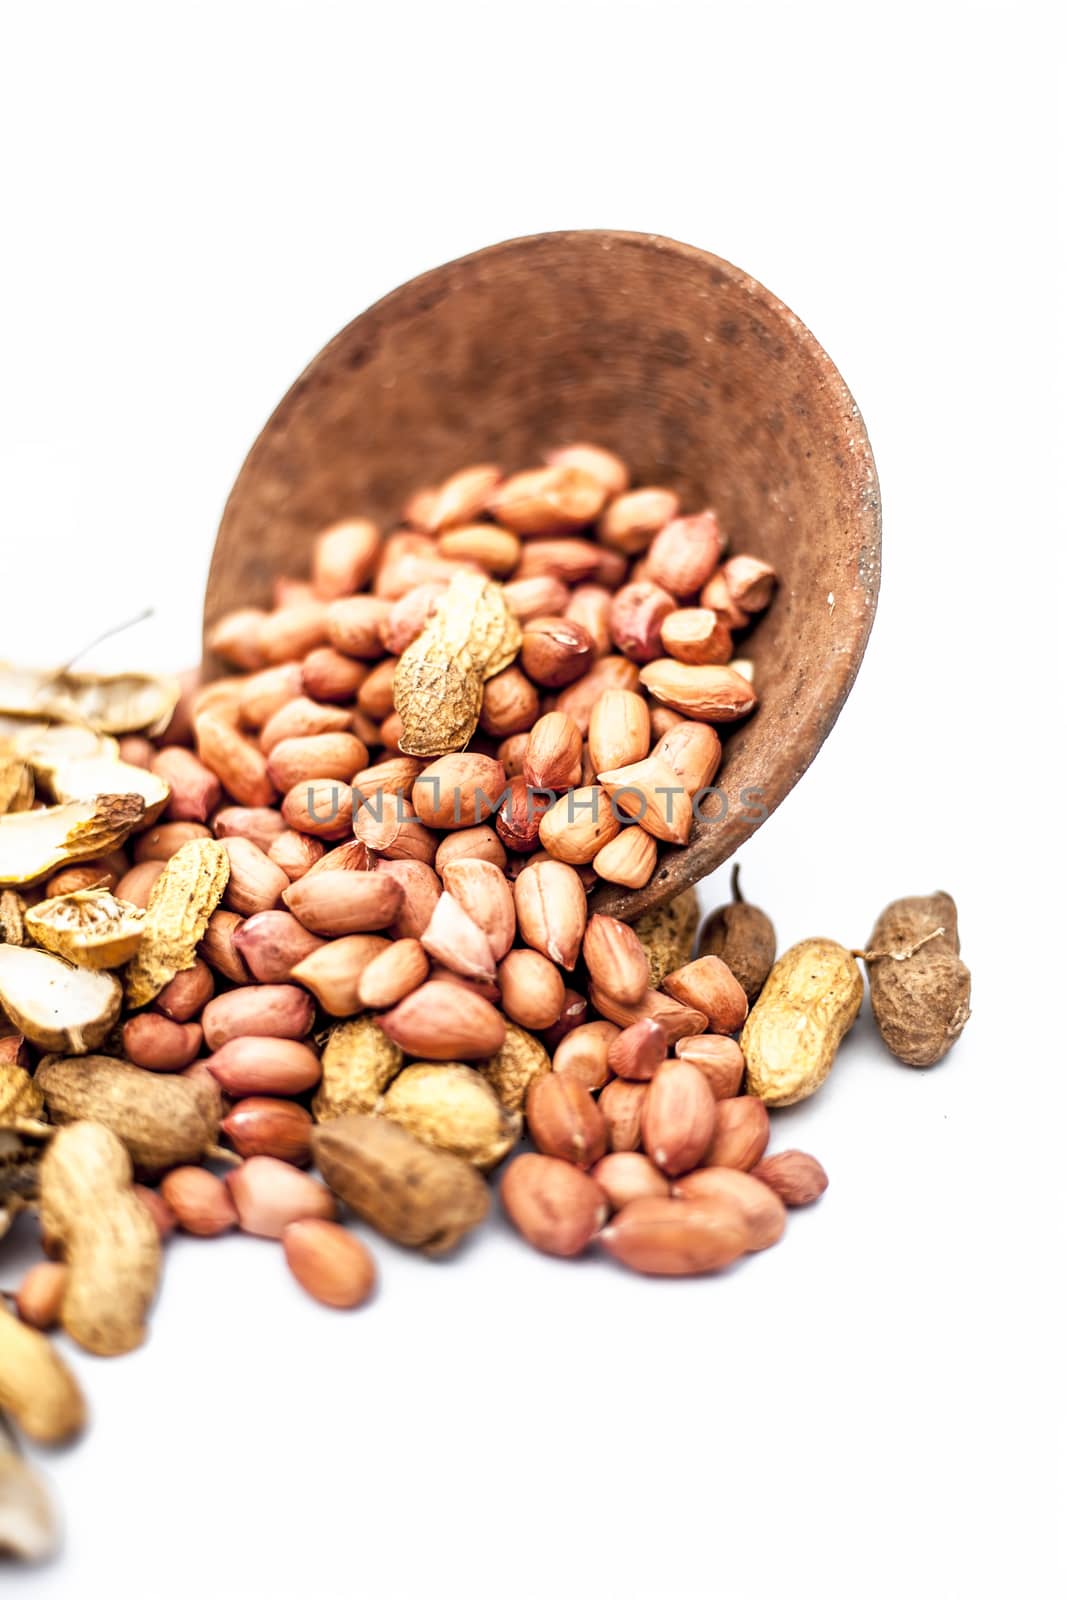 Raw organic groundnut or peanuts isolated on white with raw peanuts in a hamper with peanuts in clay bowl.